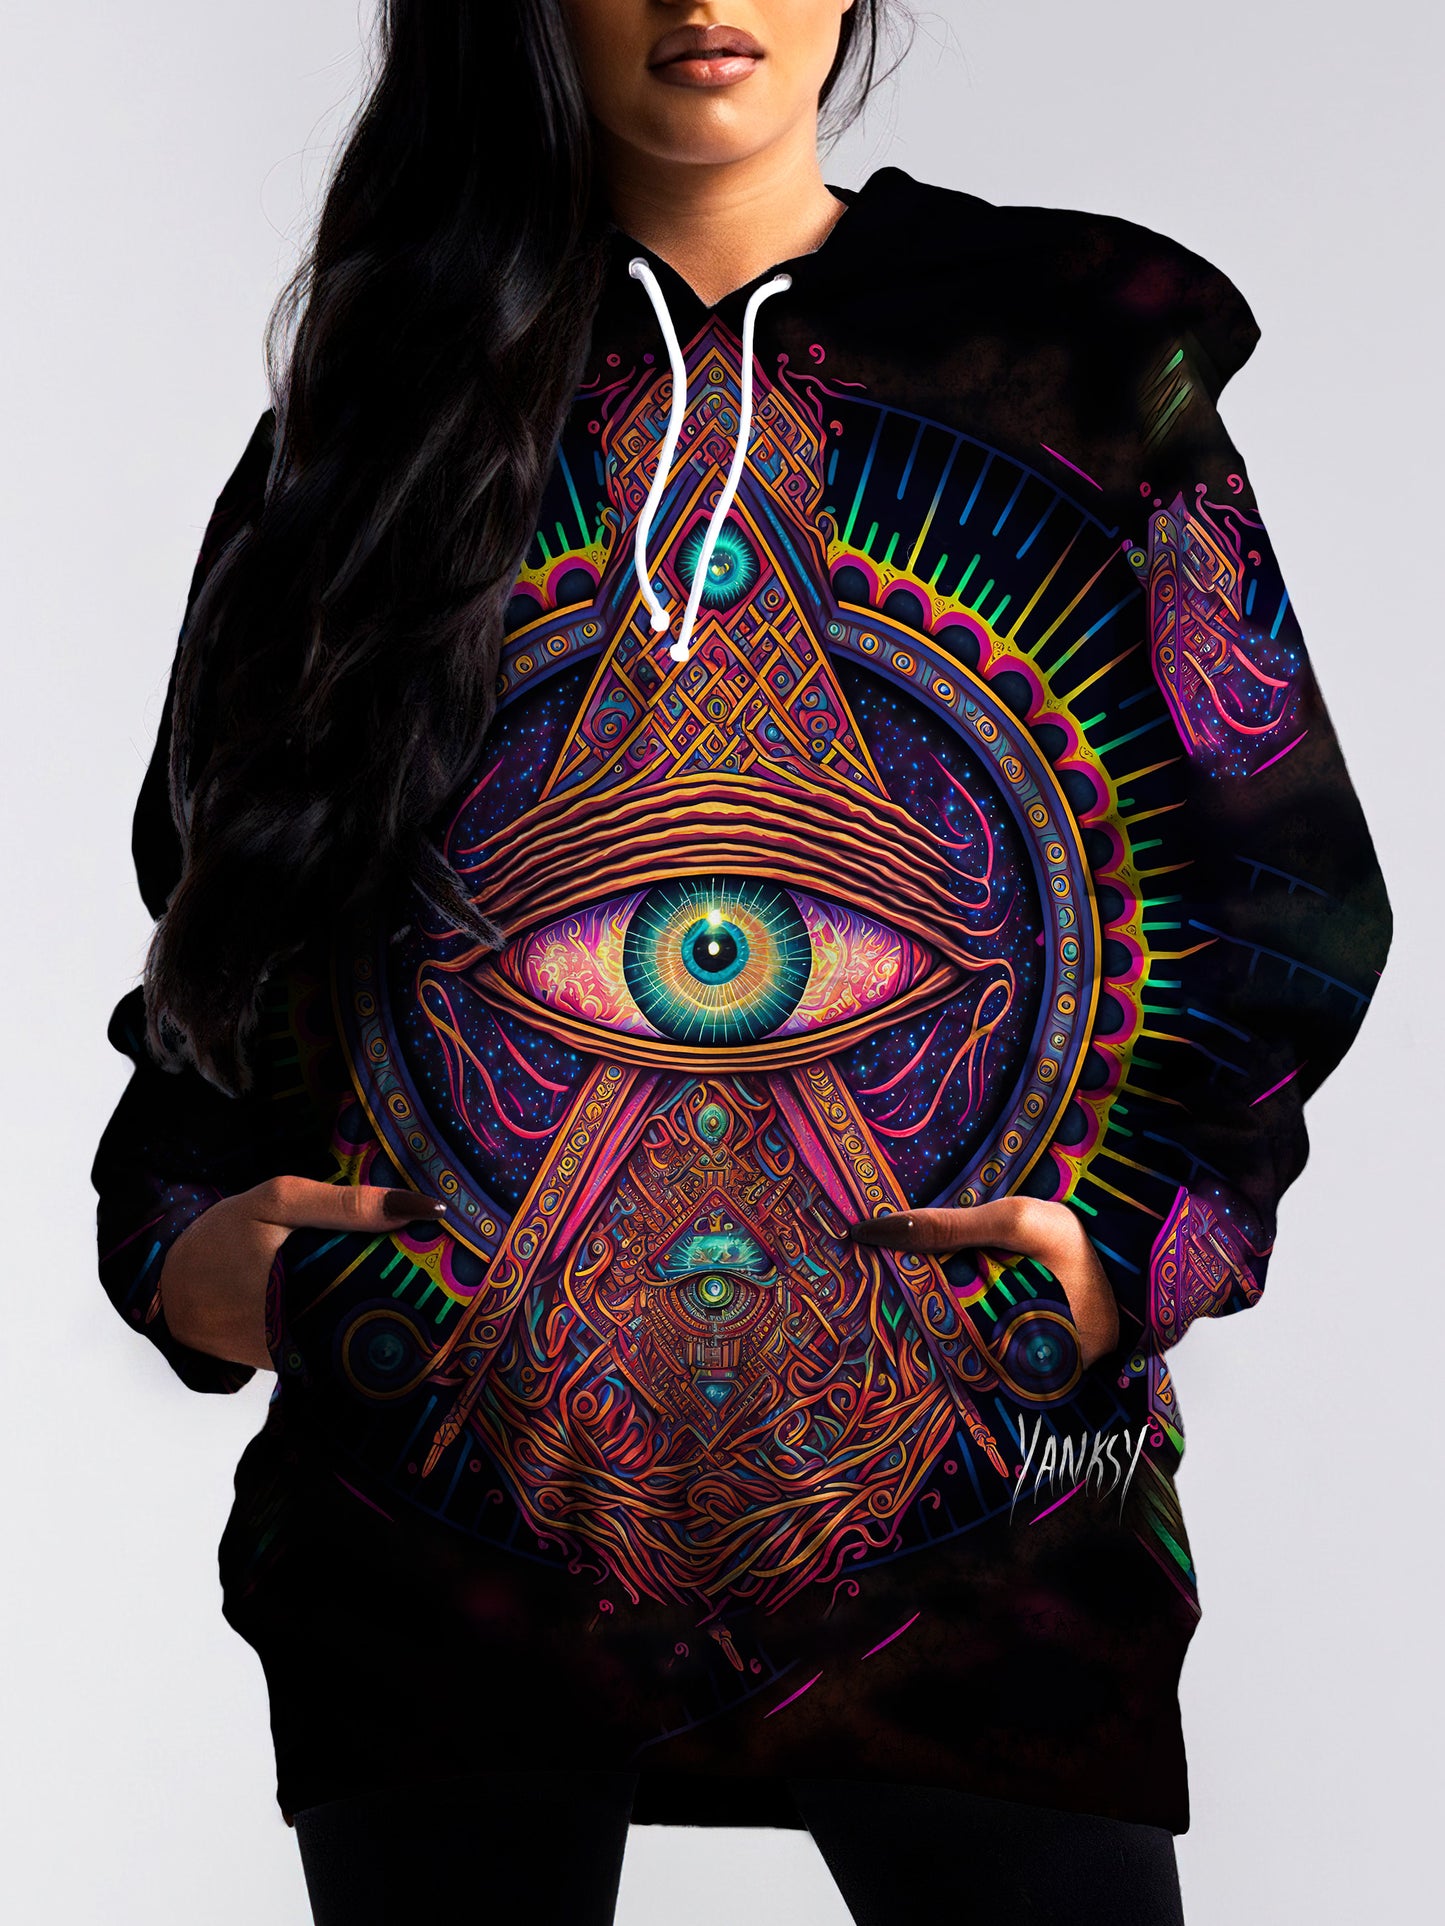 Stay warm and stylish at your next rave with this cozy pullover hoodie